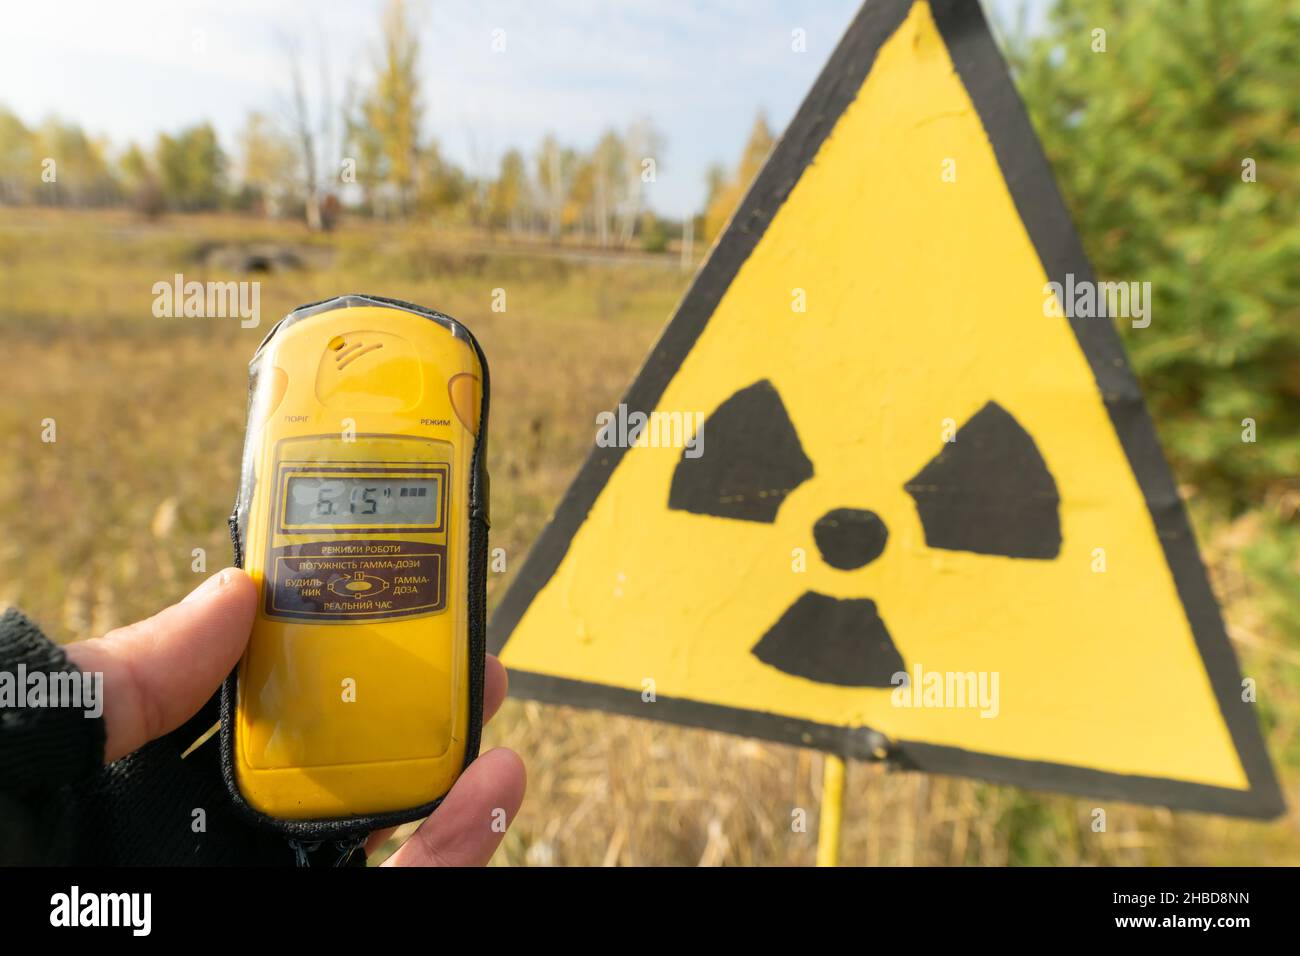 Yellowgeiger counter on the hands shows radiation level near radiation symbol in front of red forest in autumn.Ukraine. Chernobyl group tour. Stock Photo